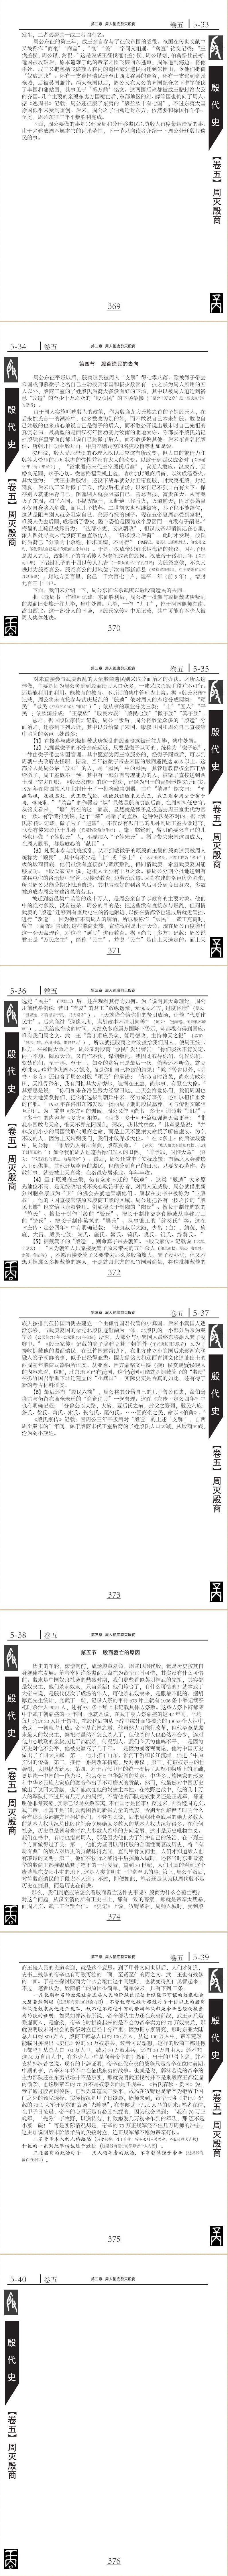 <span style='color:#FF0000;font-size:16px;font-style:none;font-weight:bold;text-decoration:none'>11_《殷代史》之十一：卷五</span>